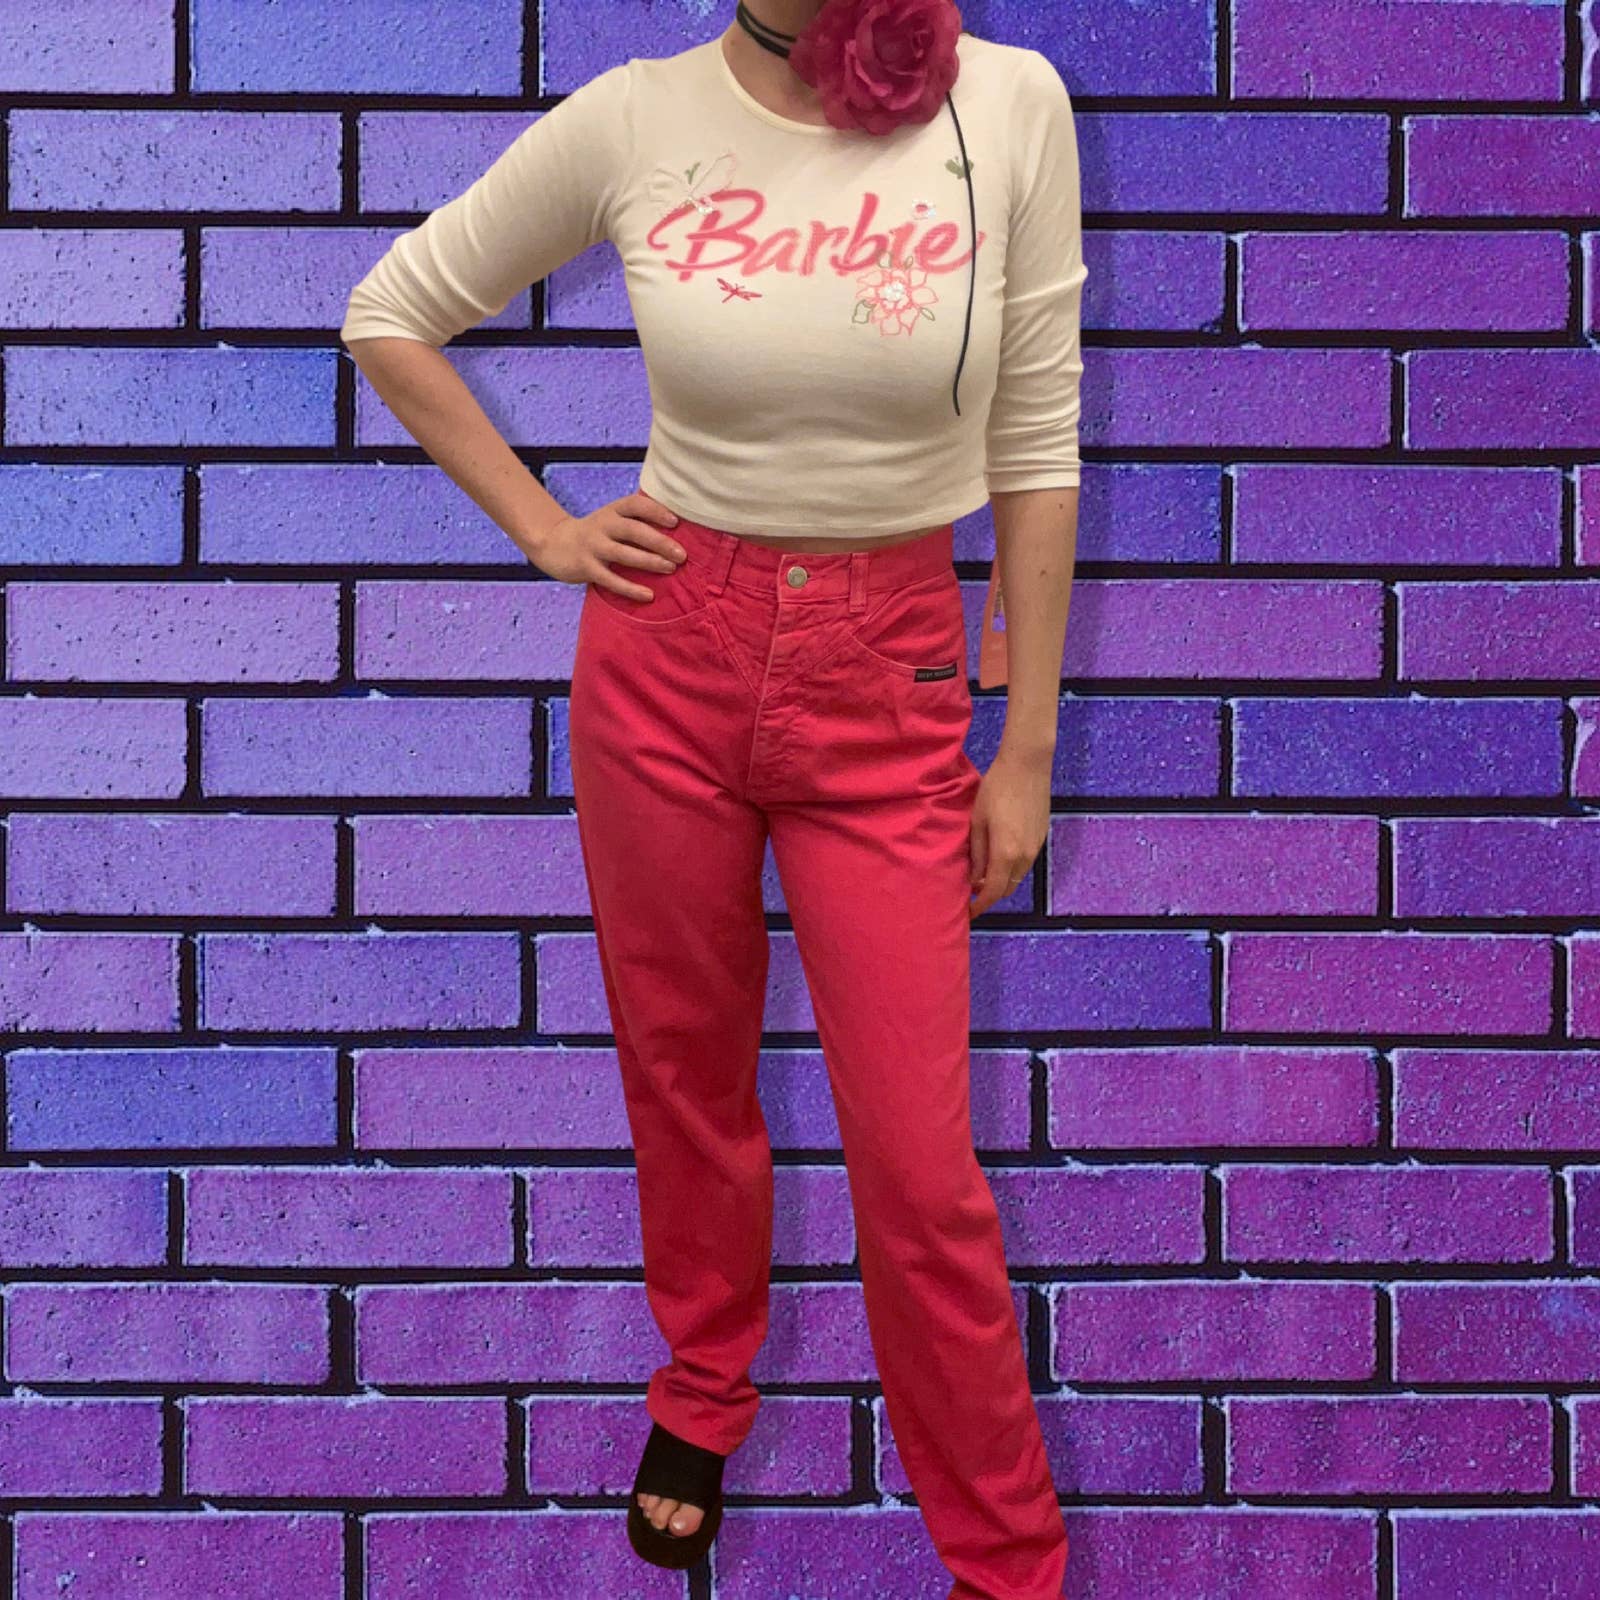 Vintage Rocky Mountain Hot Pink Jeans